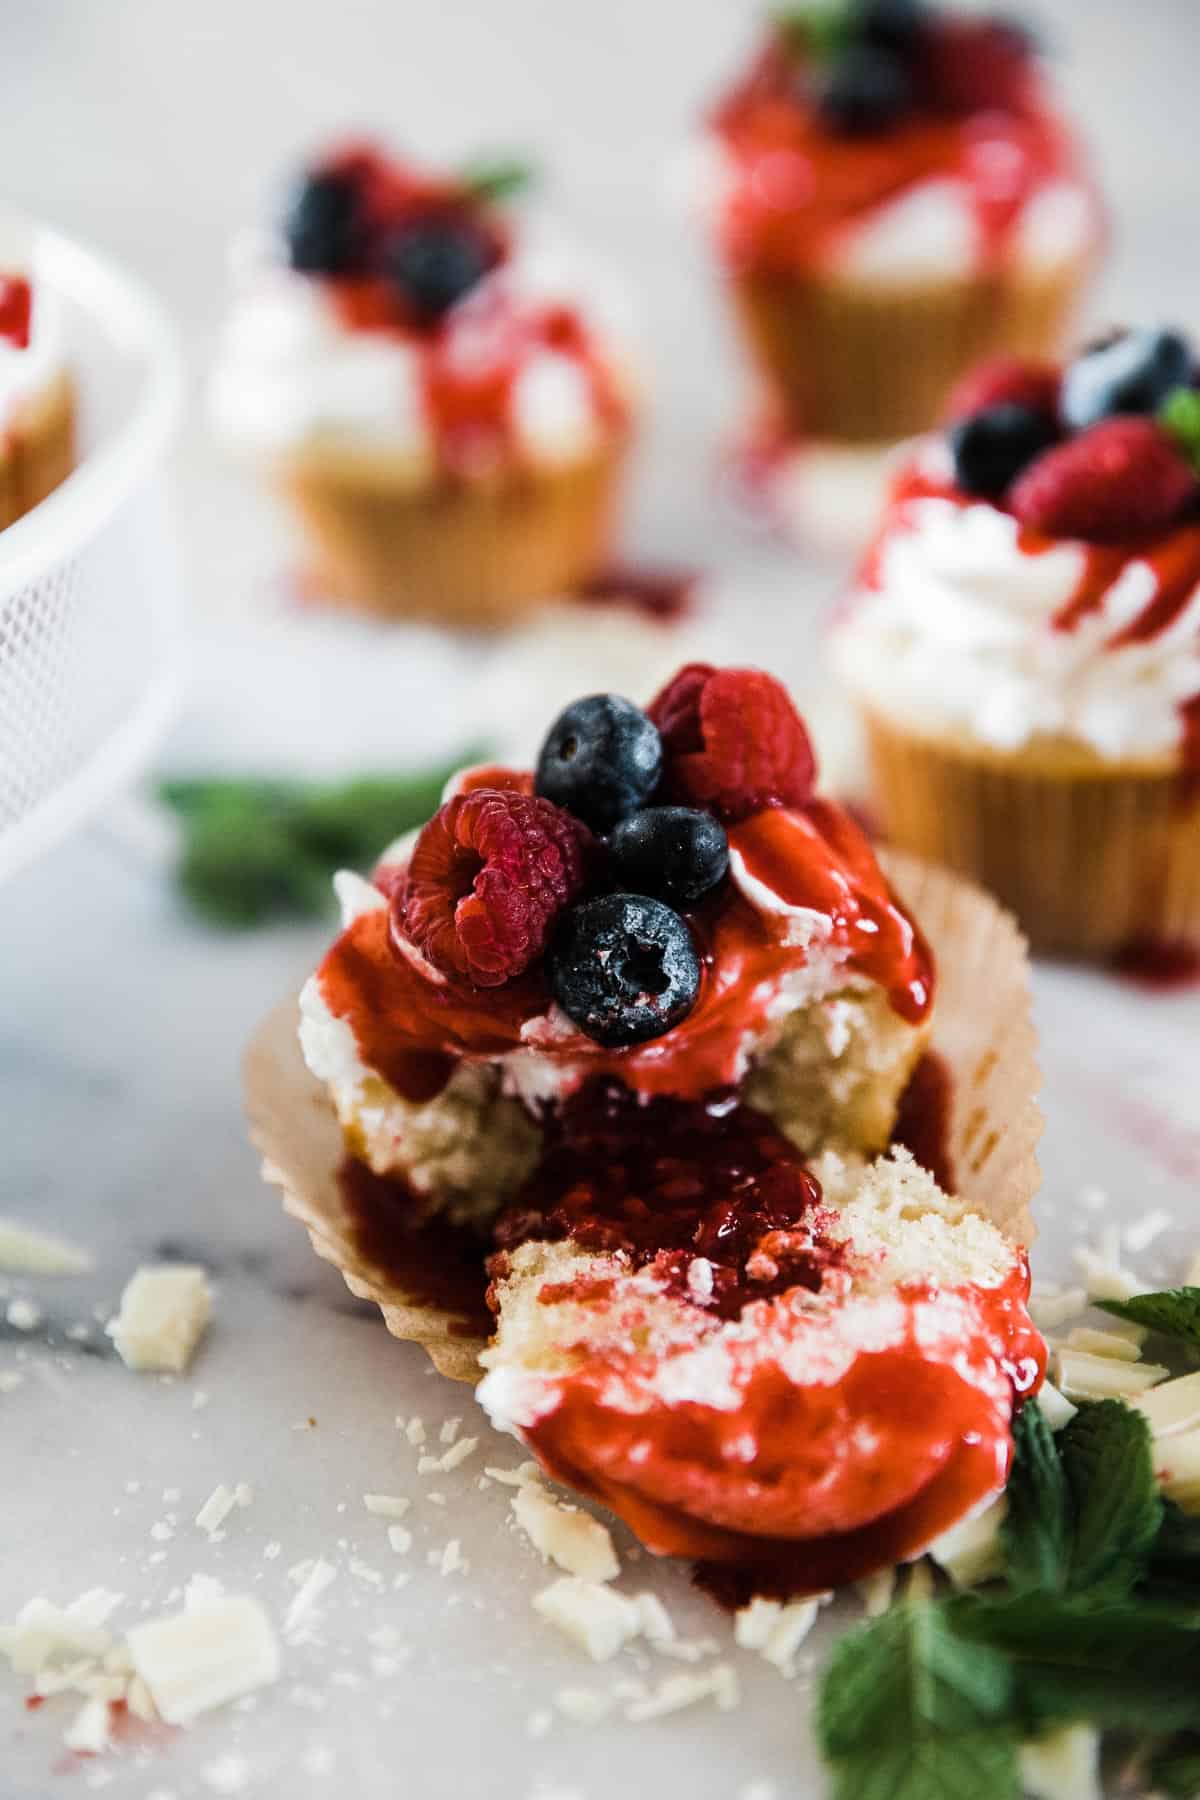 A closeup of a white chocolate raspberry cupcake cut in half and garnished with berries.